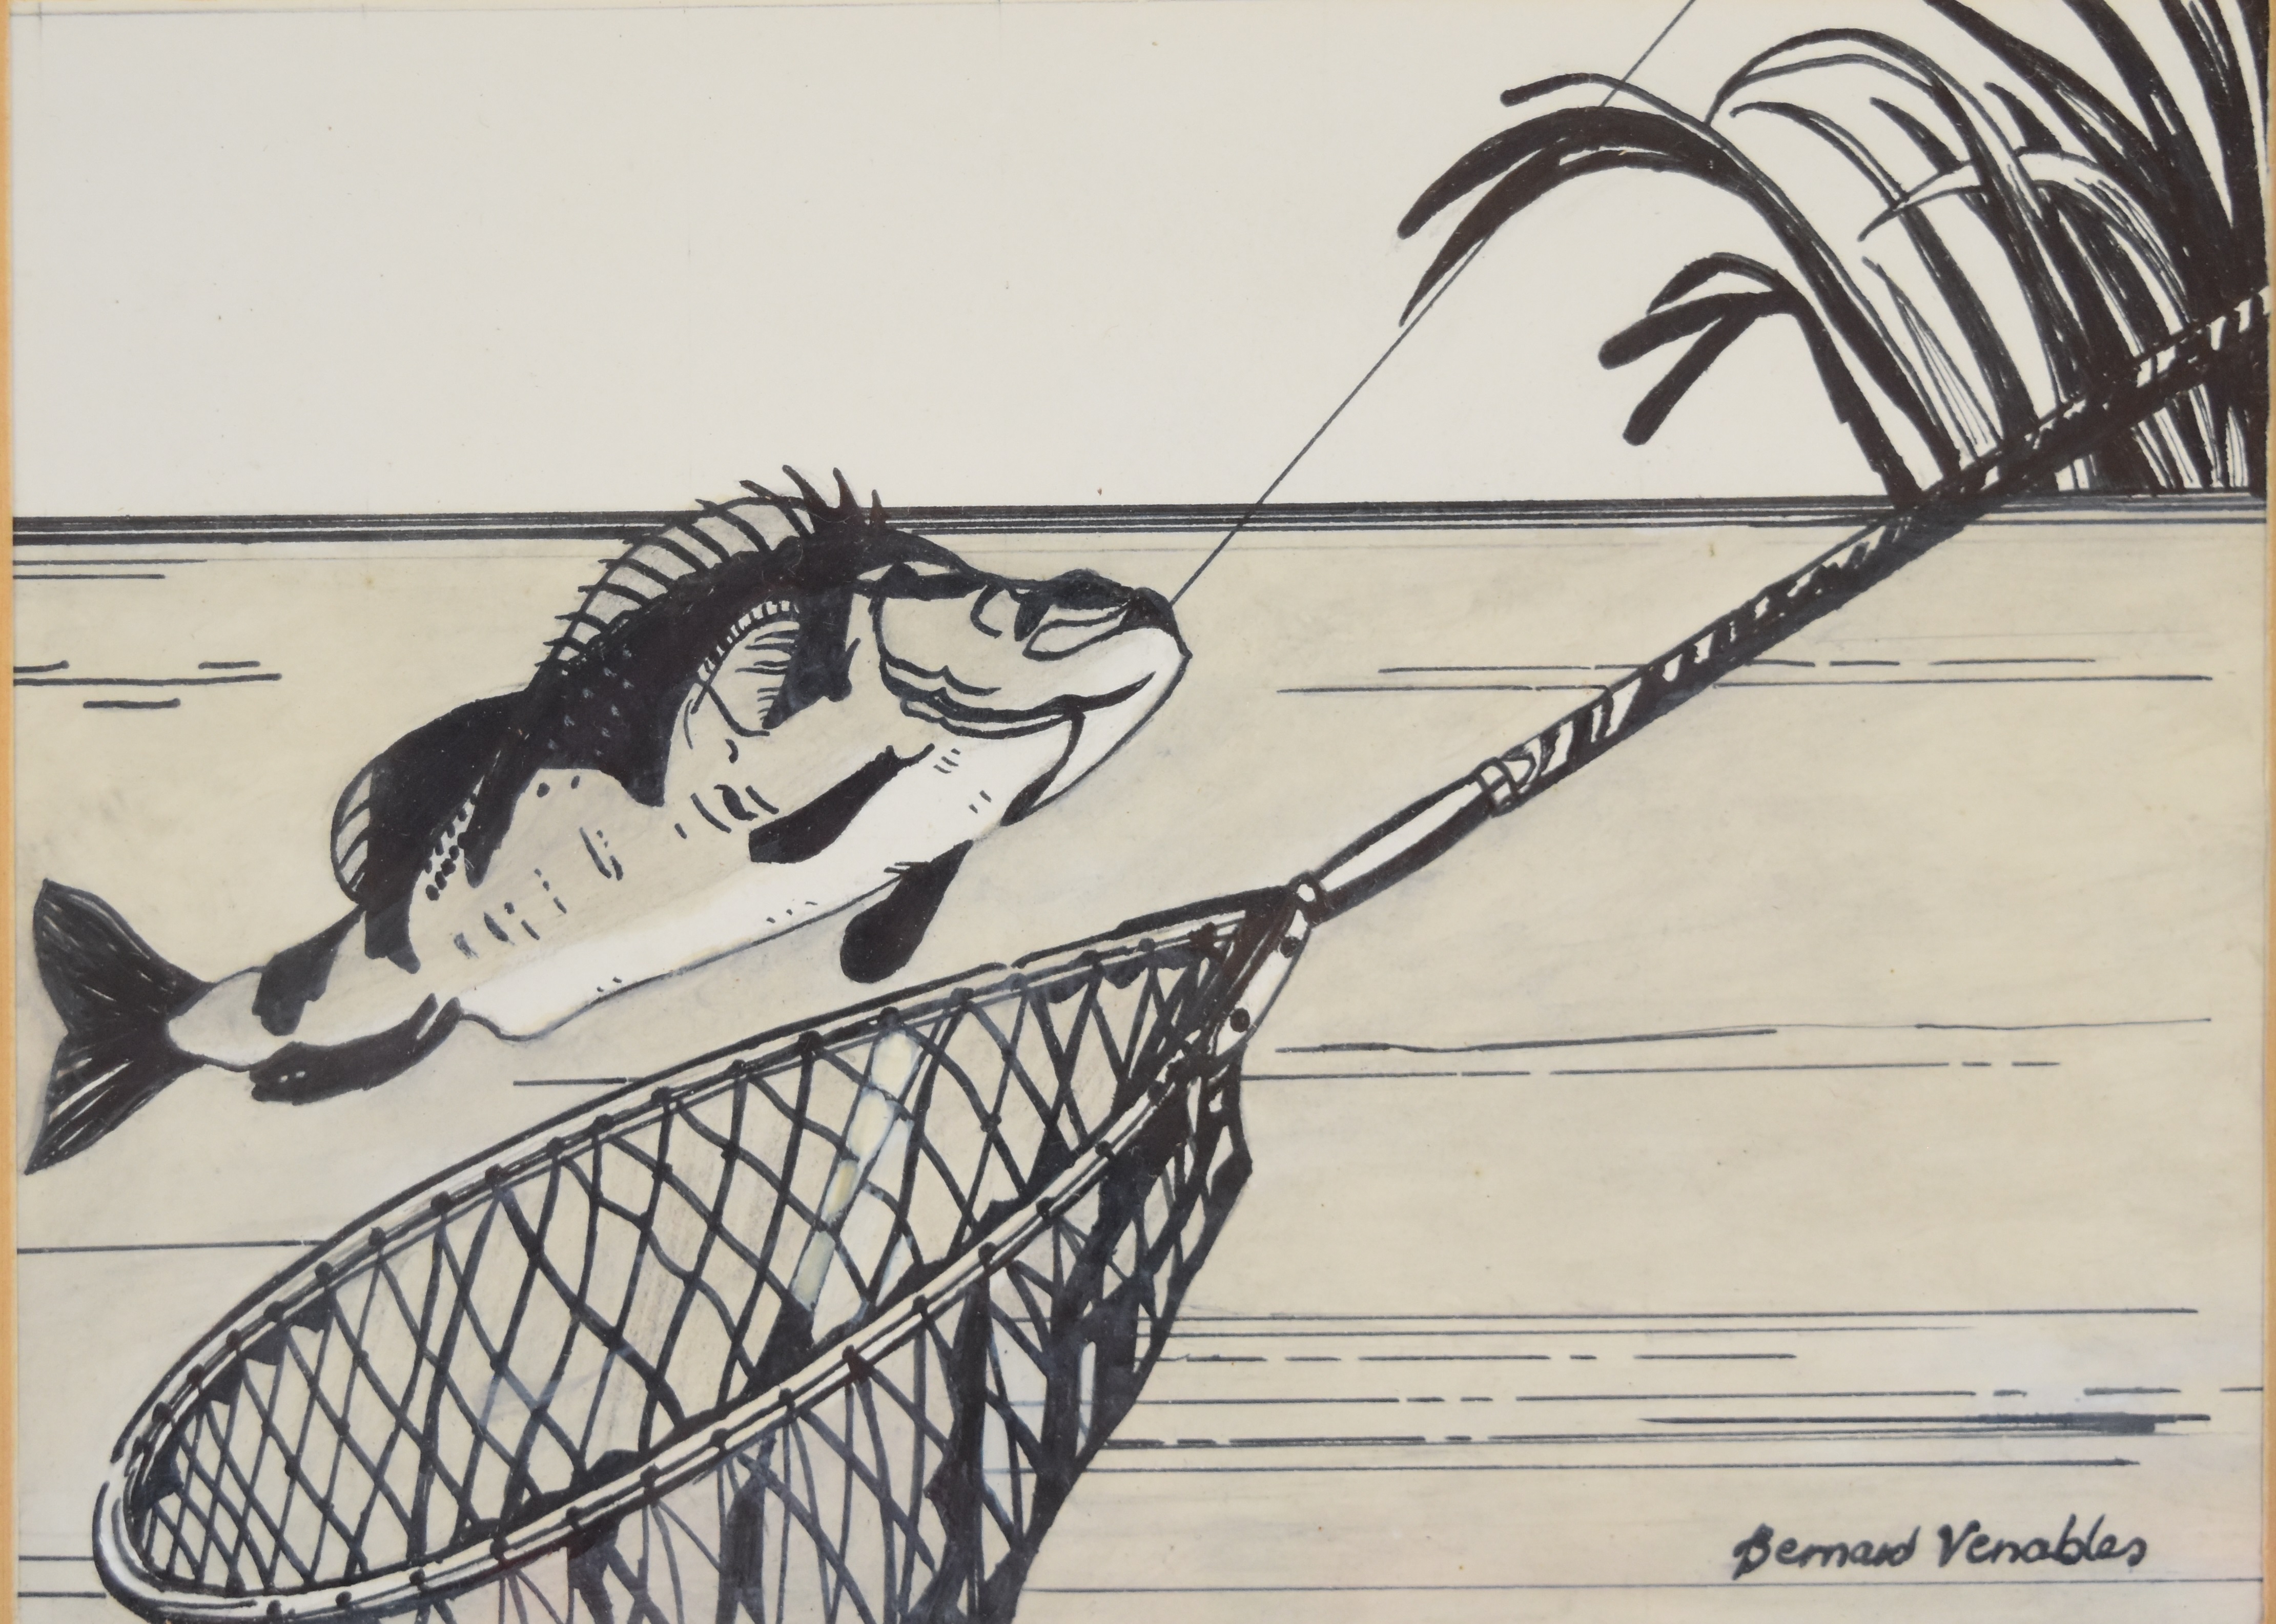 Bernard Venables (1907-2001) two pen and ink studies of fish, one with landing net the other with - Image 2 of 4